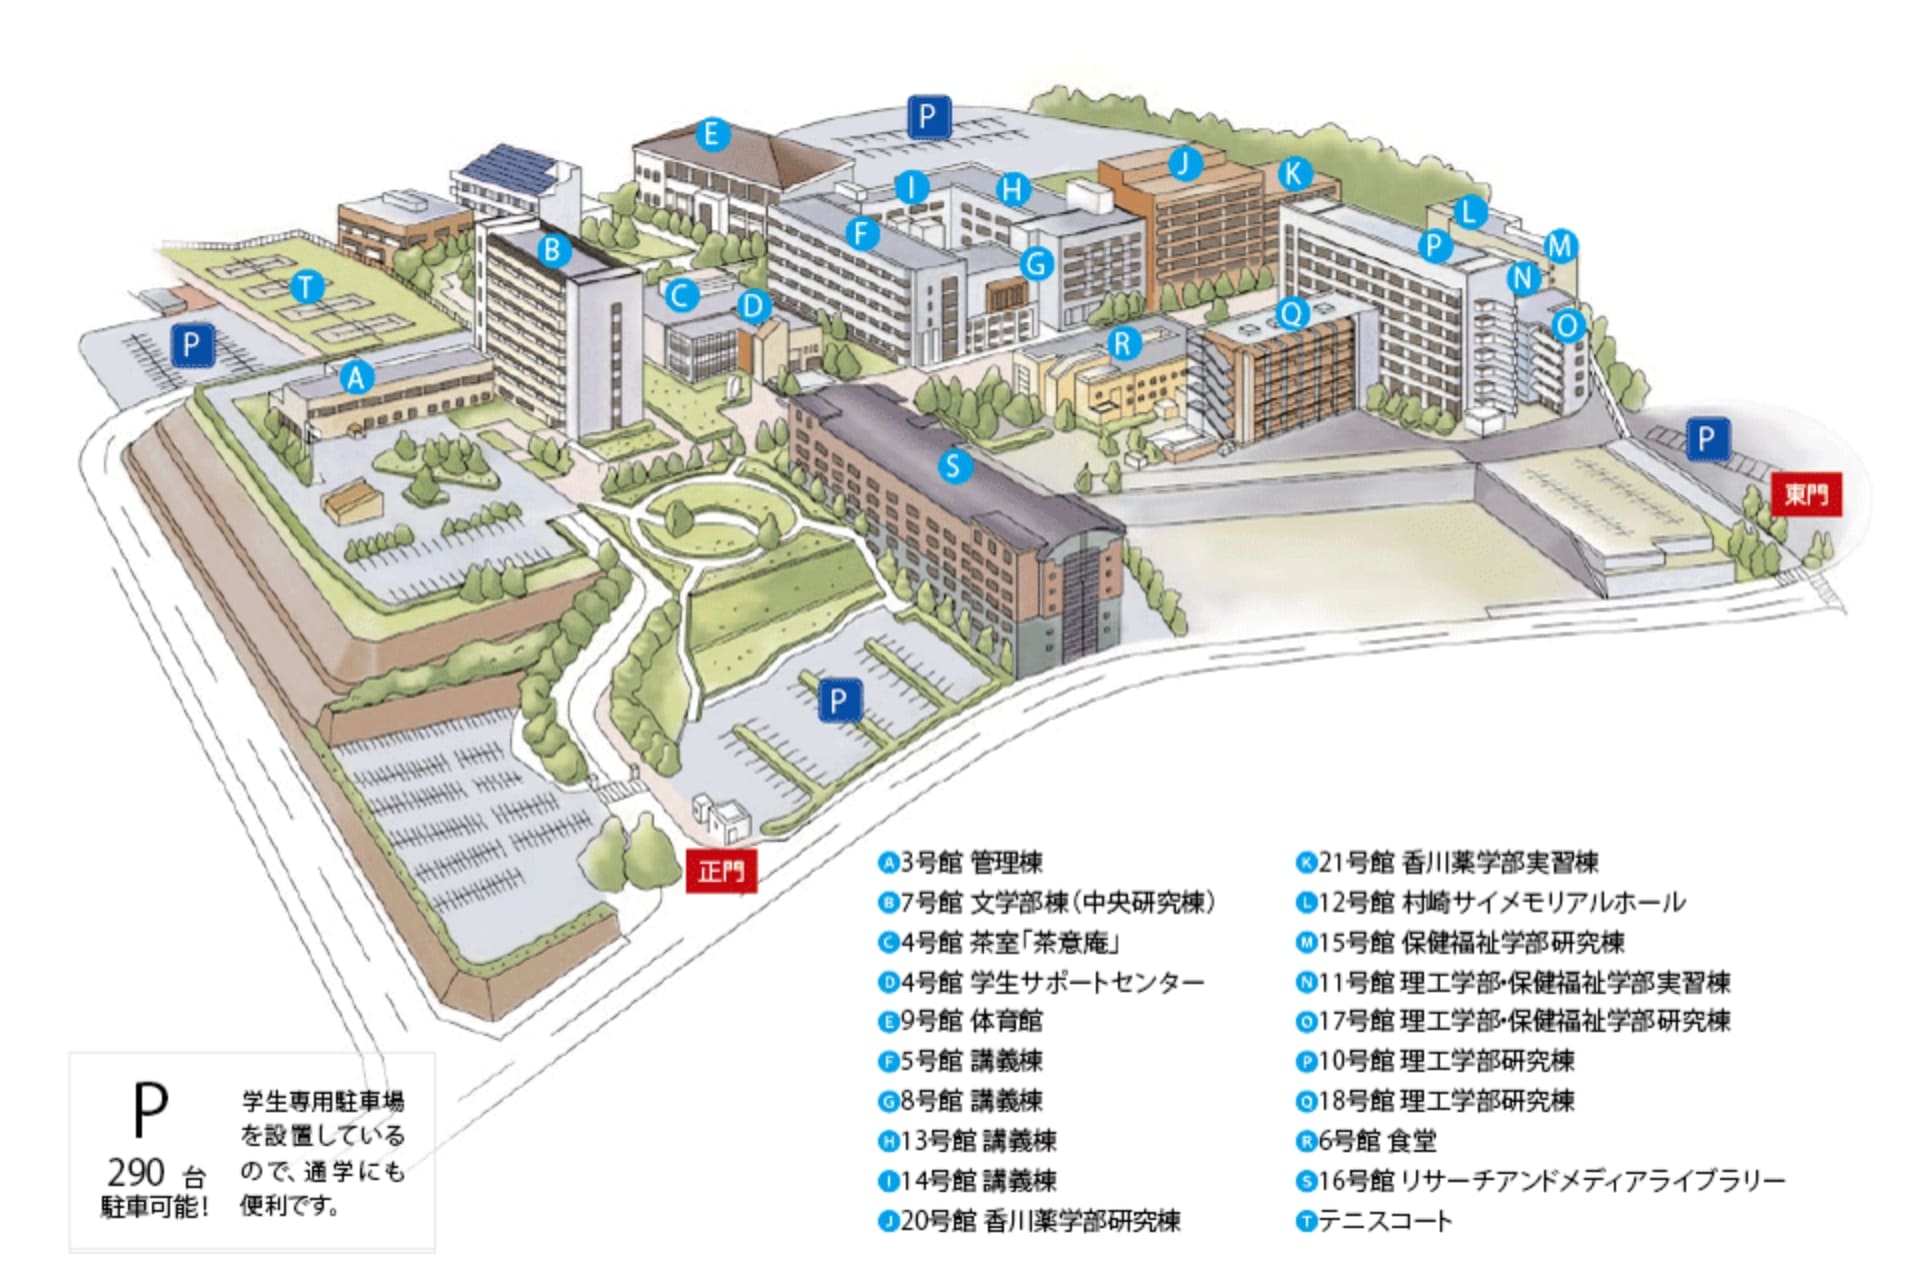 CAMPUS キャンパス紹介